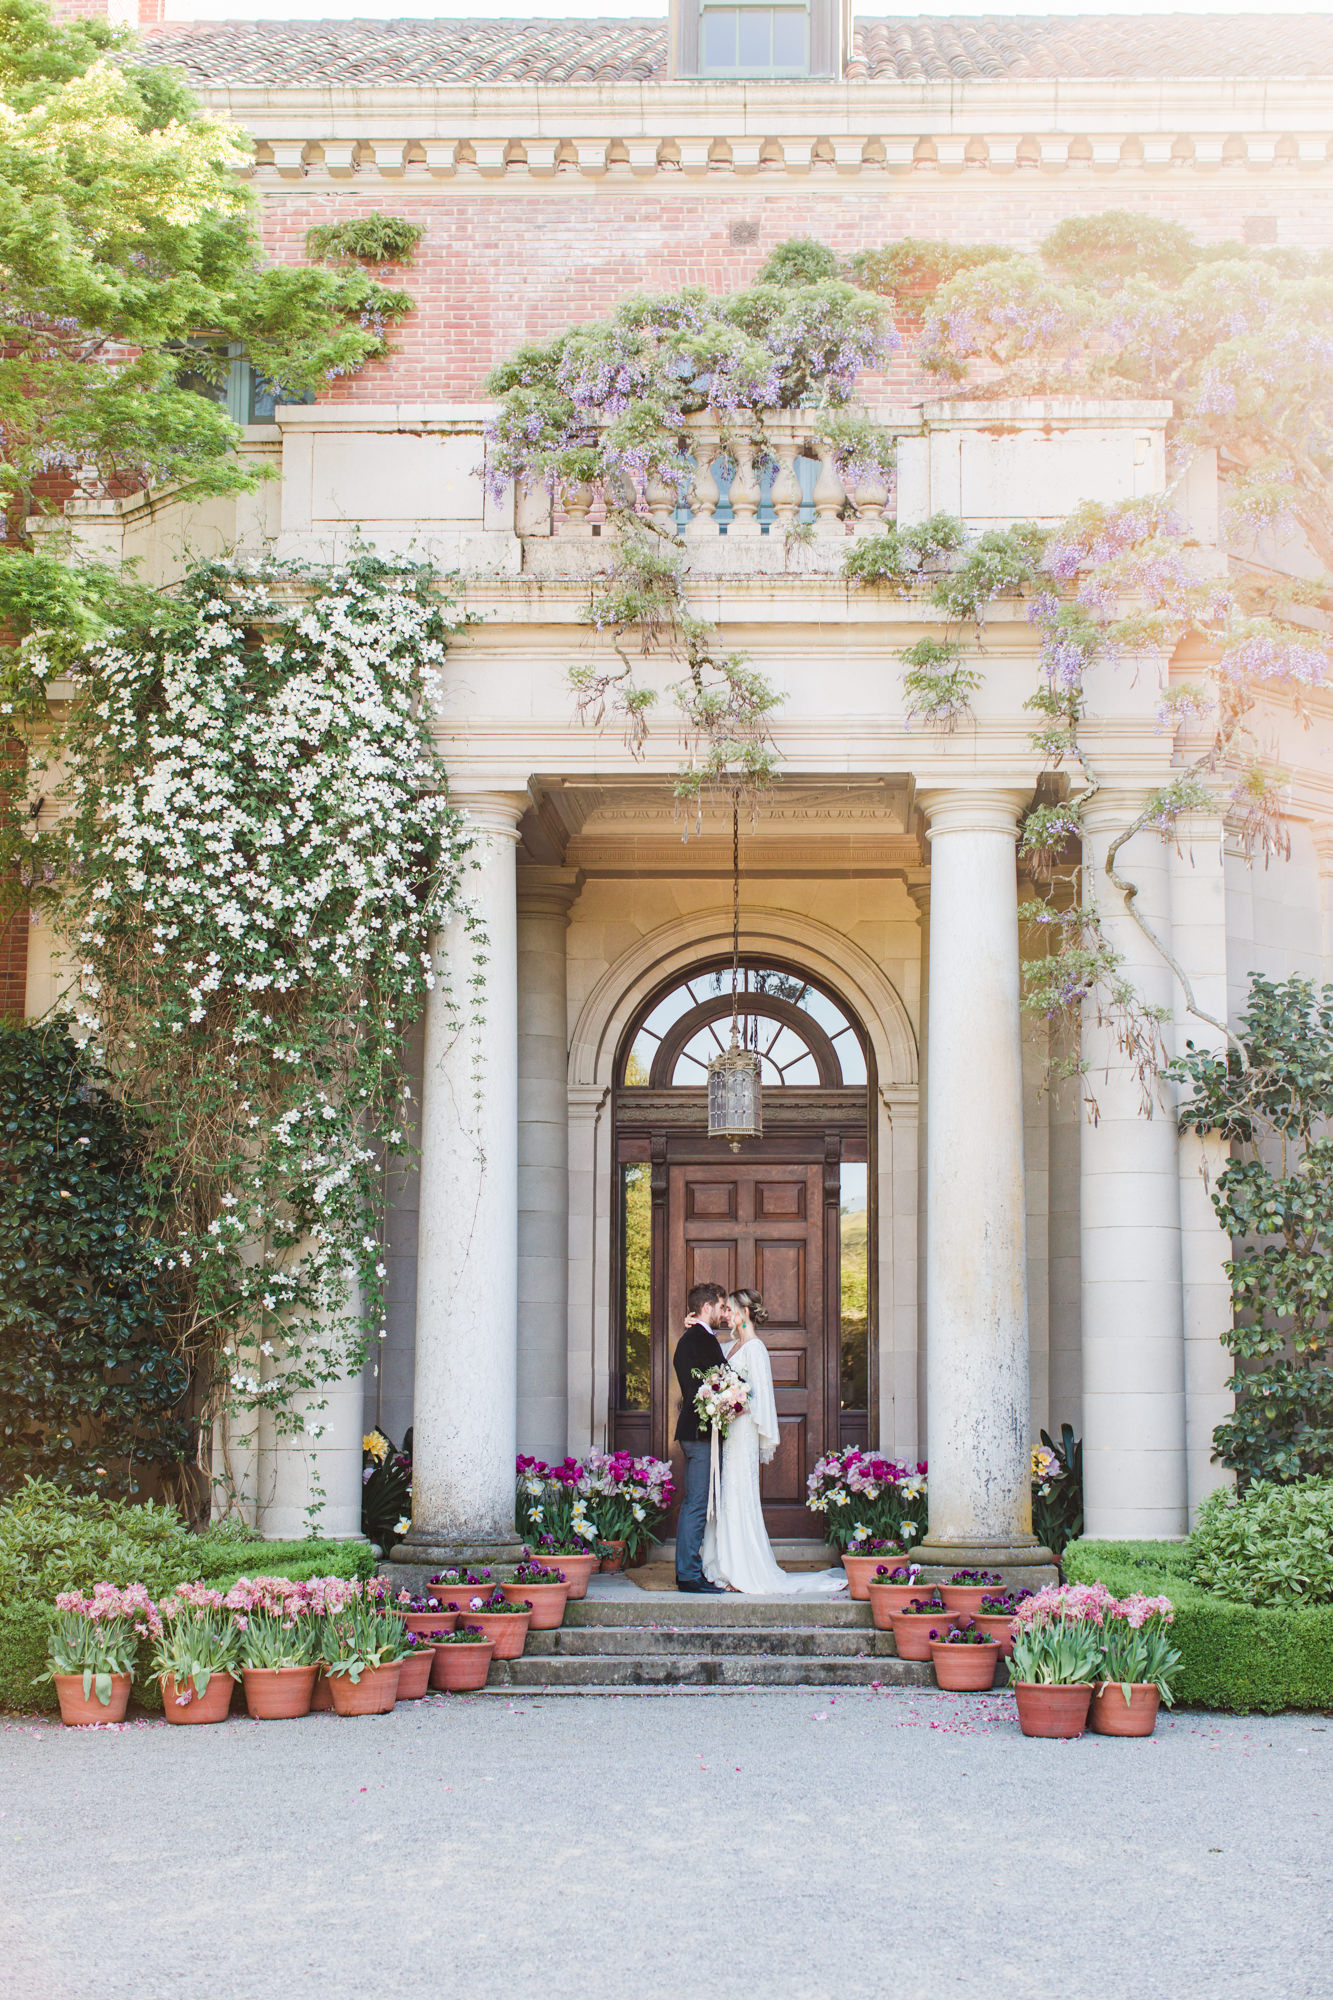 Bride and Groom at Filoli Garden Wedding in the Doorway of the Main House Entry Courtyard